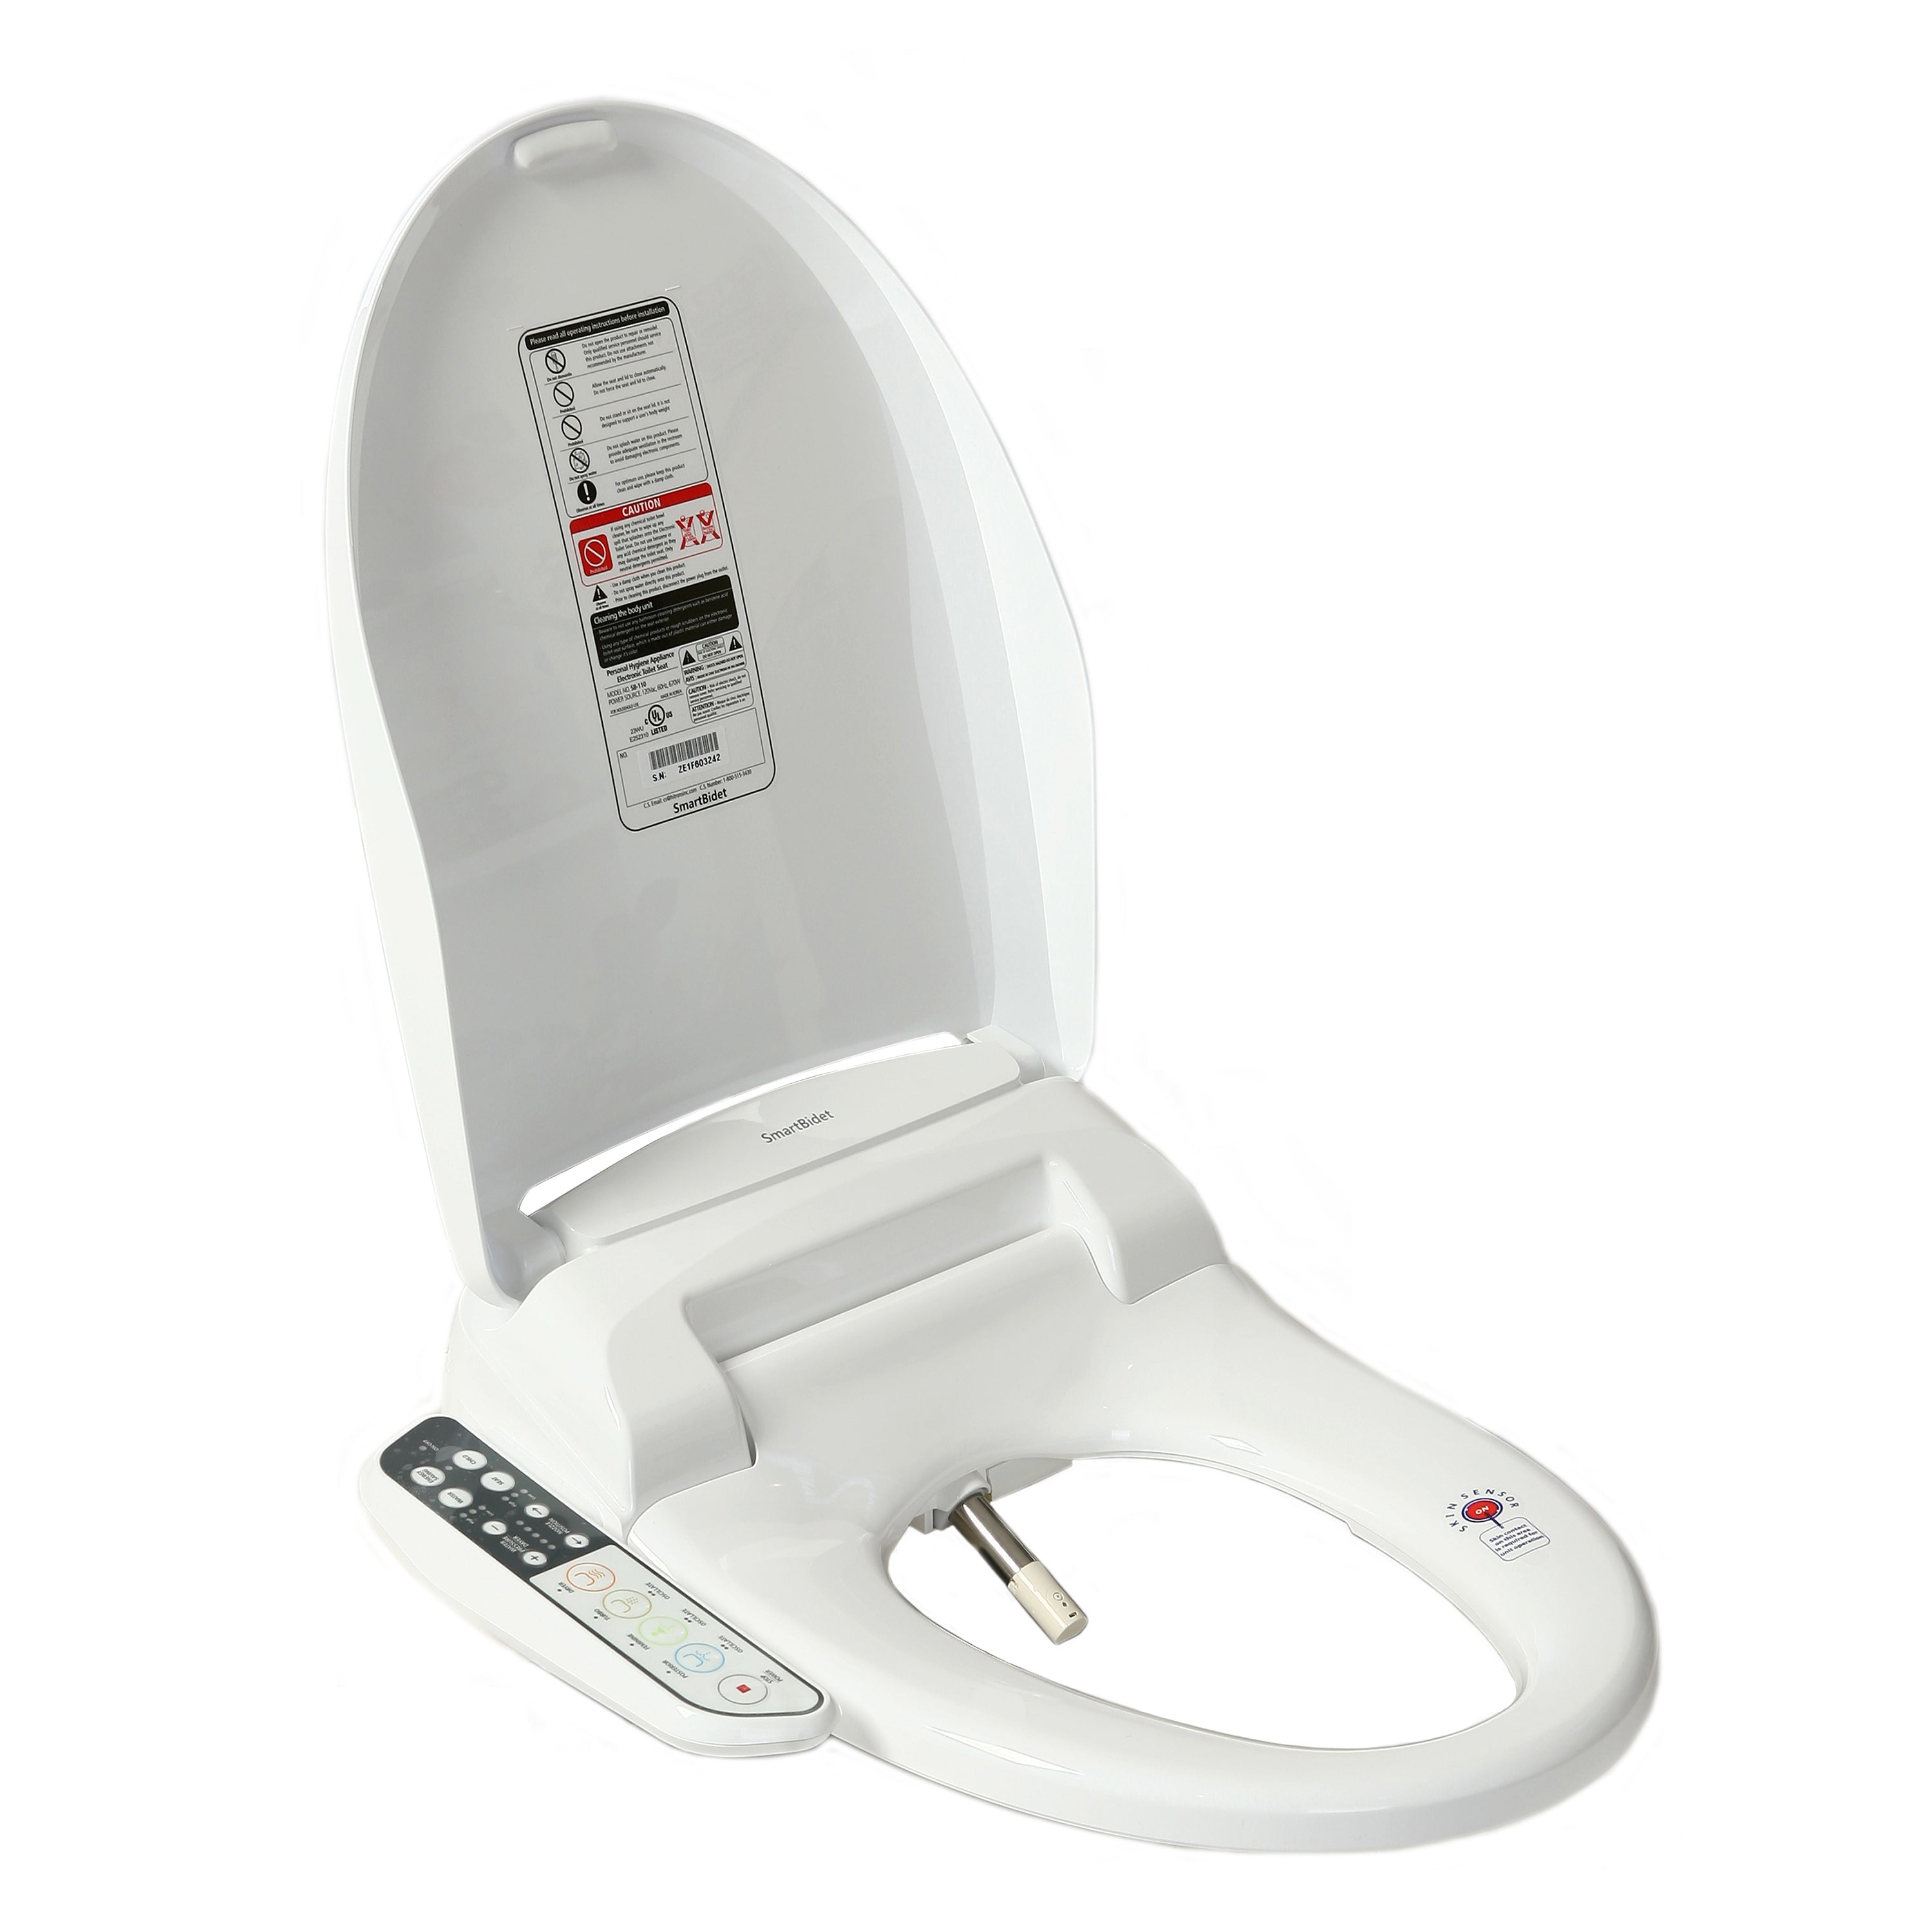 SmartBidet SB-110 Electric Bidet Seat for Most Elongated Toilets with Control Panel, Stainless Steel Nozzle with Removable Nozzle Cap, Child Wash Function, Slim and Strong Design in White